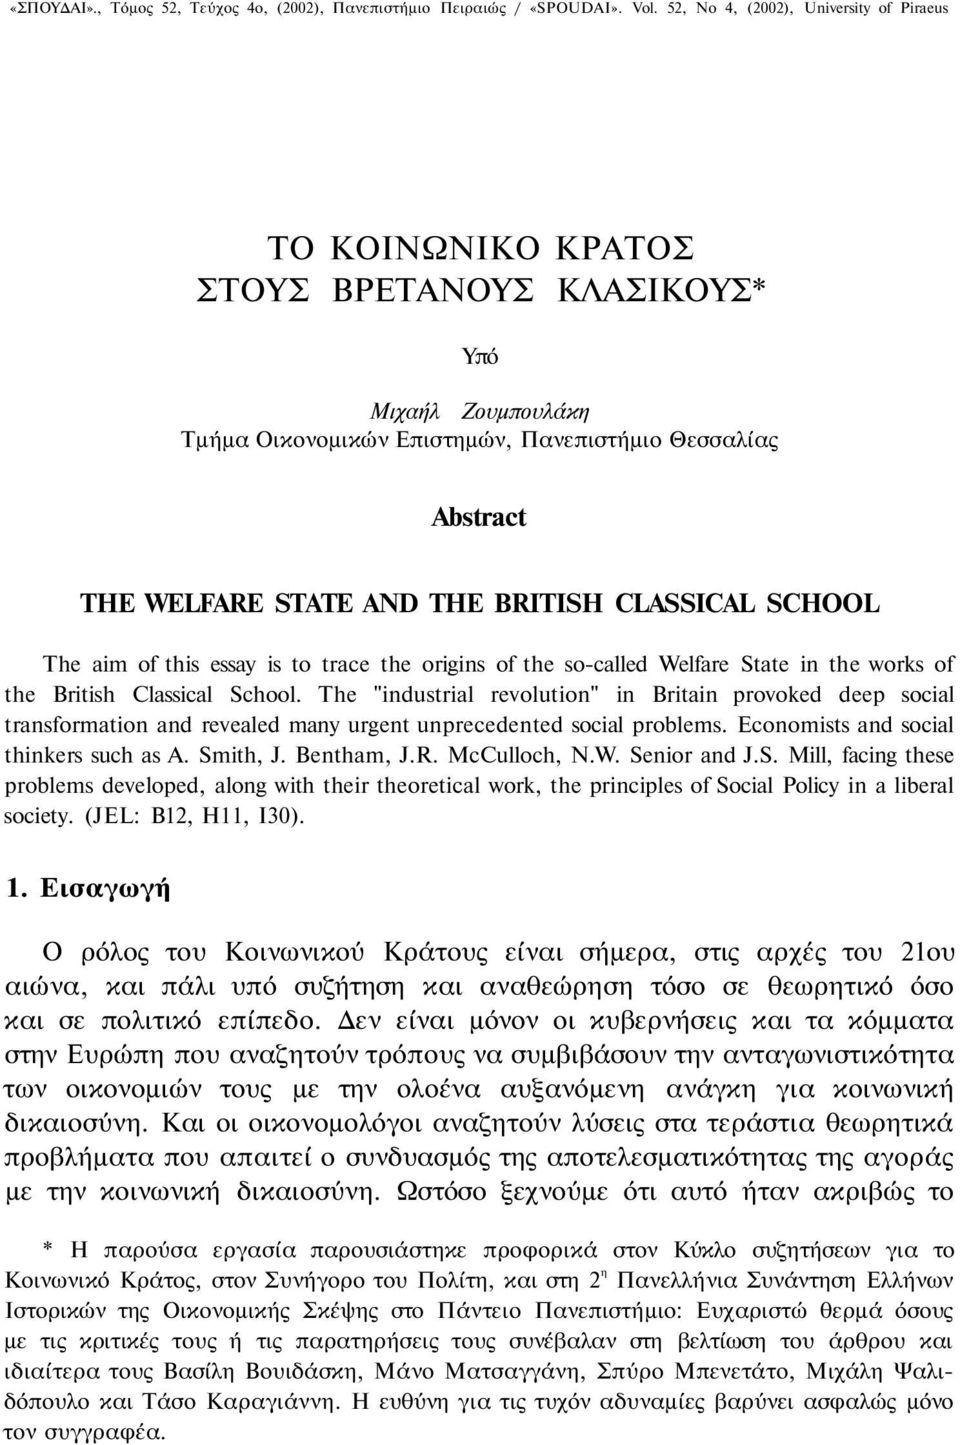 BRITISH CLASSICAL SCHOOL The aim of this essay is to trace the origins of the so-called Welfare State in the works of the British Classical School.